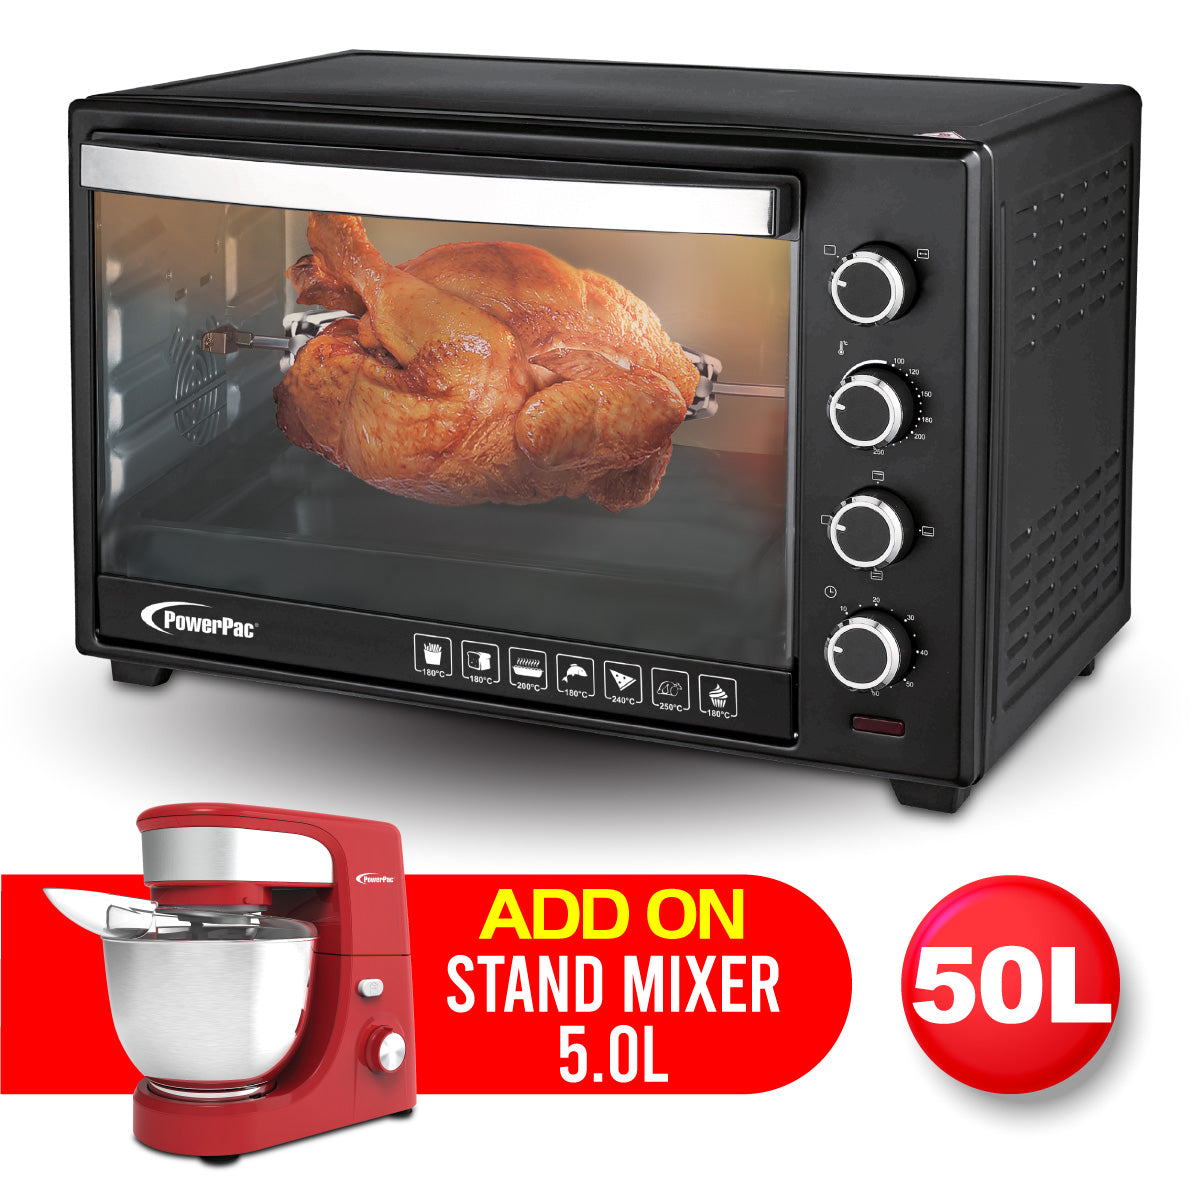 Electric Oven 50L with Rotisserie &amp; Convection Functions, 2 Trays &amp; Wire Mesh (PPT45)